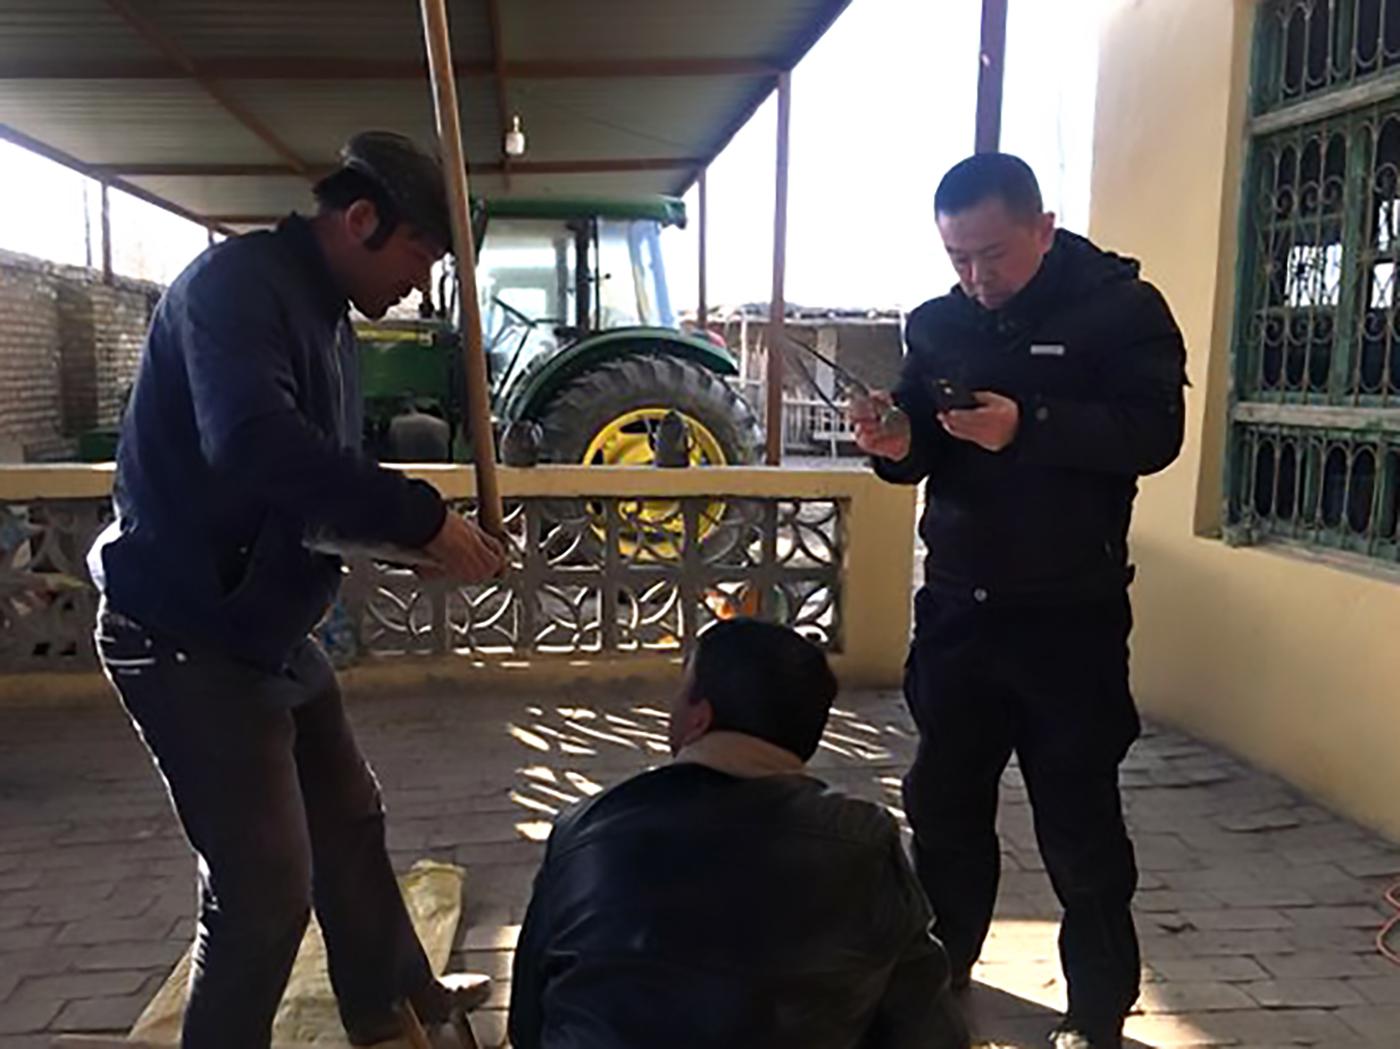 A Xinjiang Police College webpage shows police officers collecting information from villagers in Kargilik (or Yecheng) County in Kashgar Prefecture, Xinjiang. 